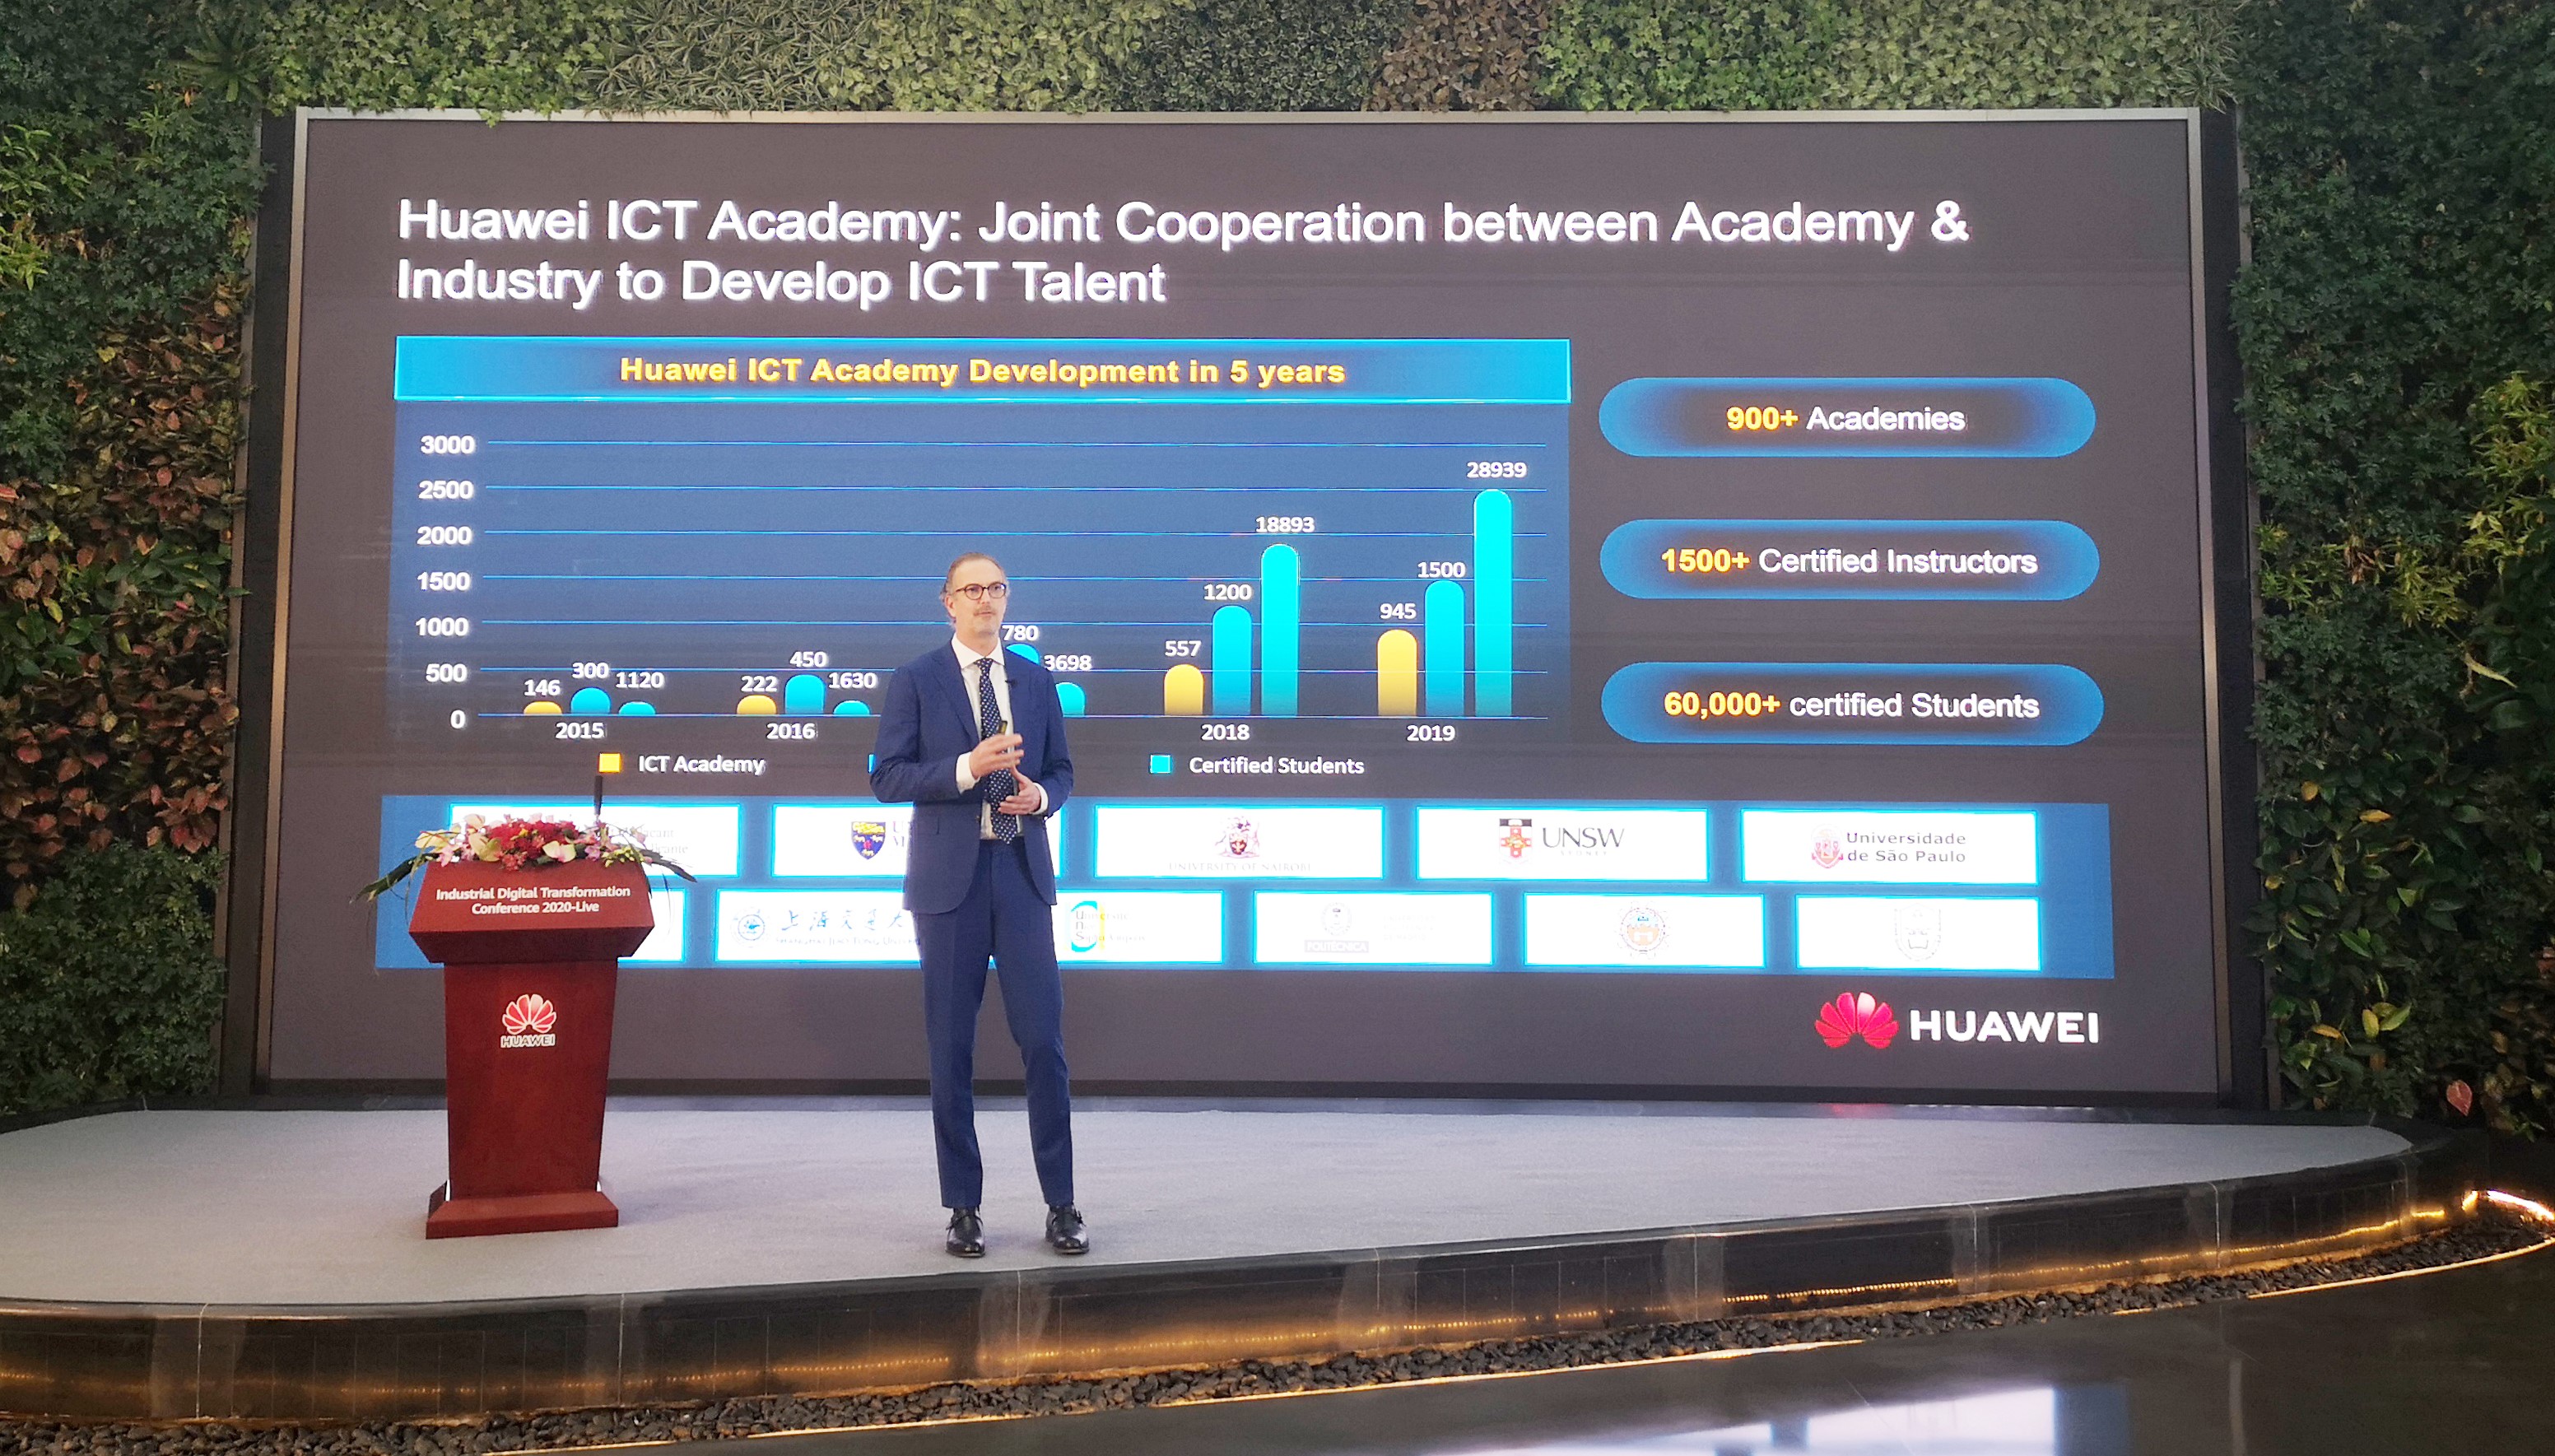 Hank Stokbroekx, VP of Enterprise Service, Huawei Enterprise, announces the launch of the company's ICT Academy 2.0